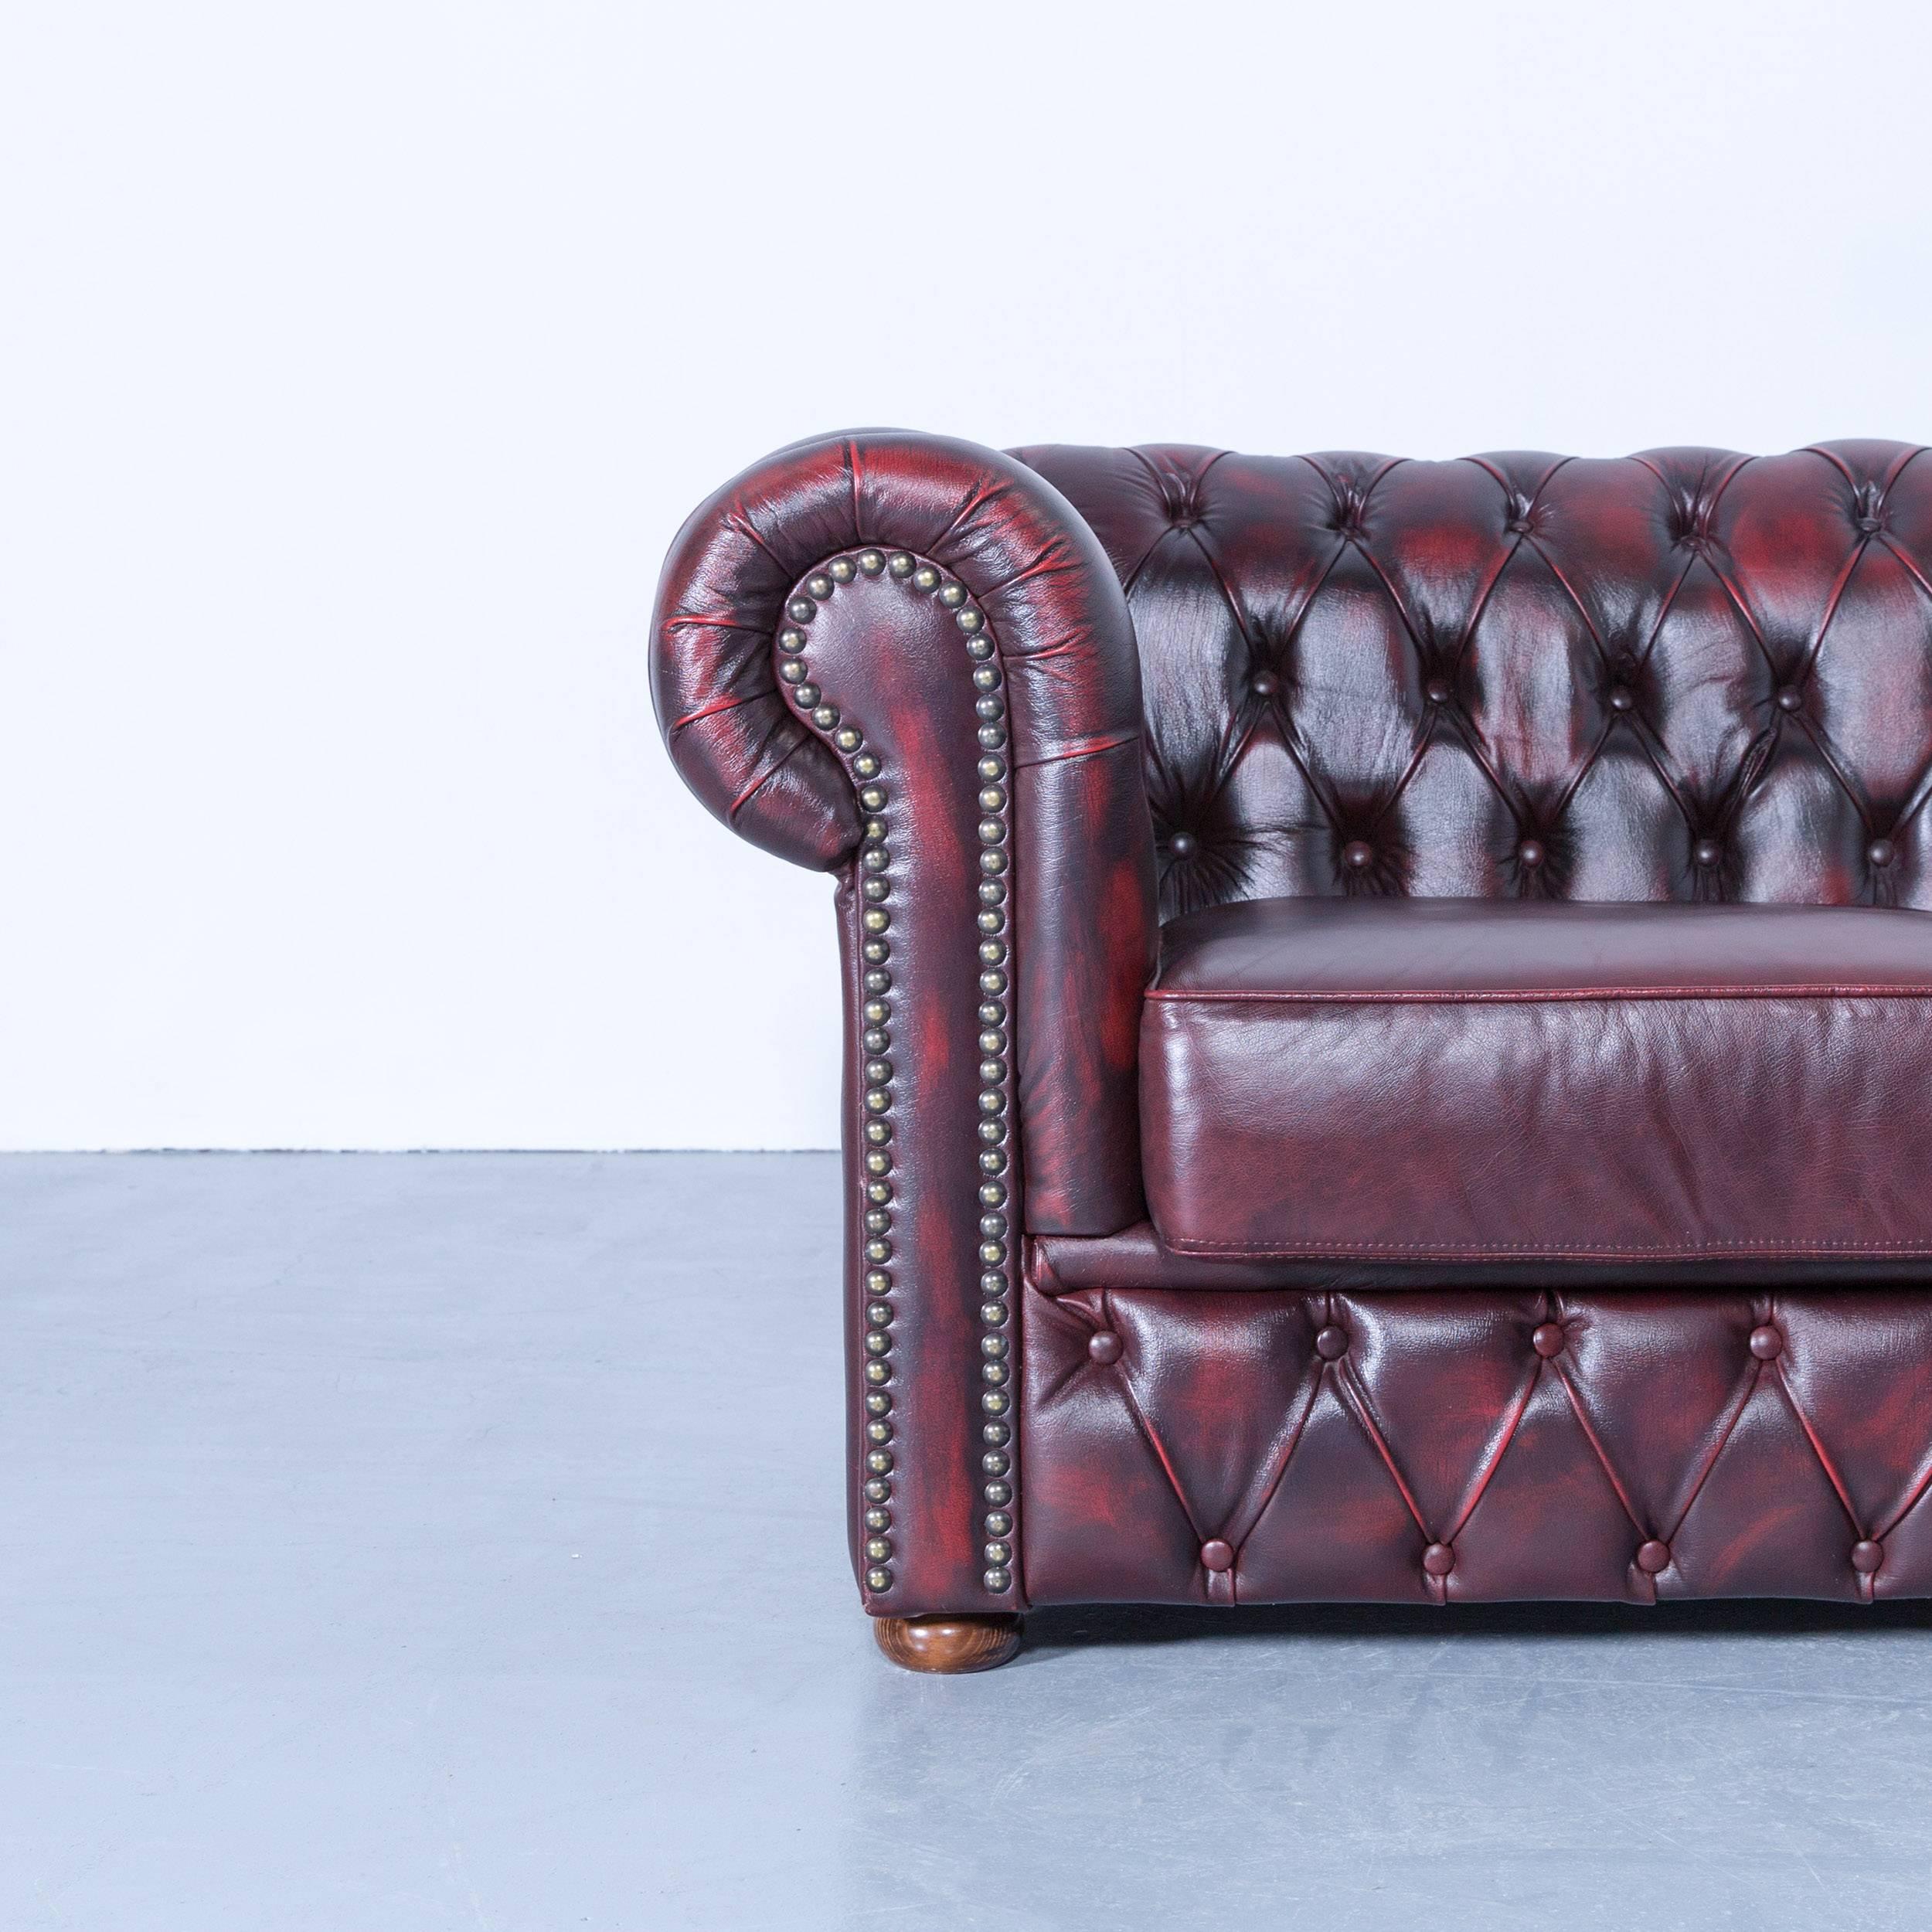 Rochester Chesterfield corner sofa and footstool oxblood red leather couch set, made for pure comfort.